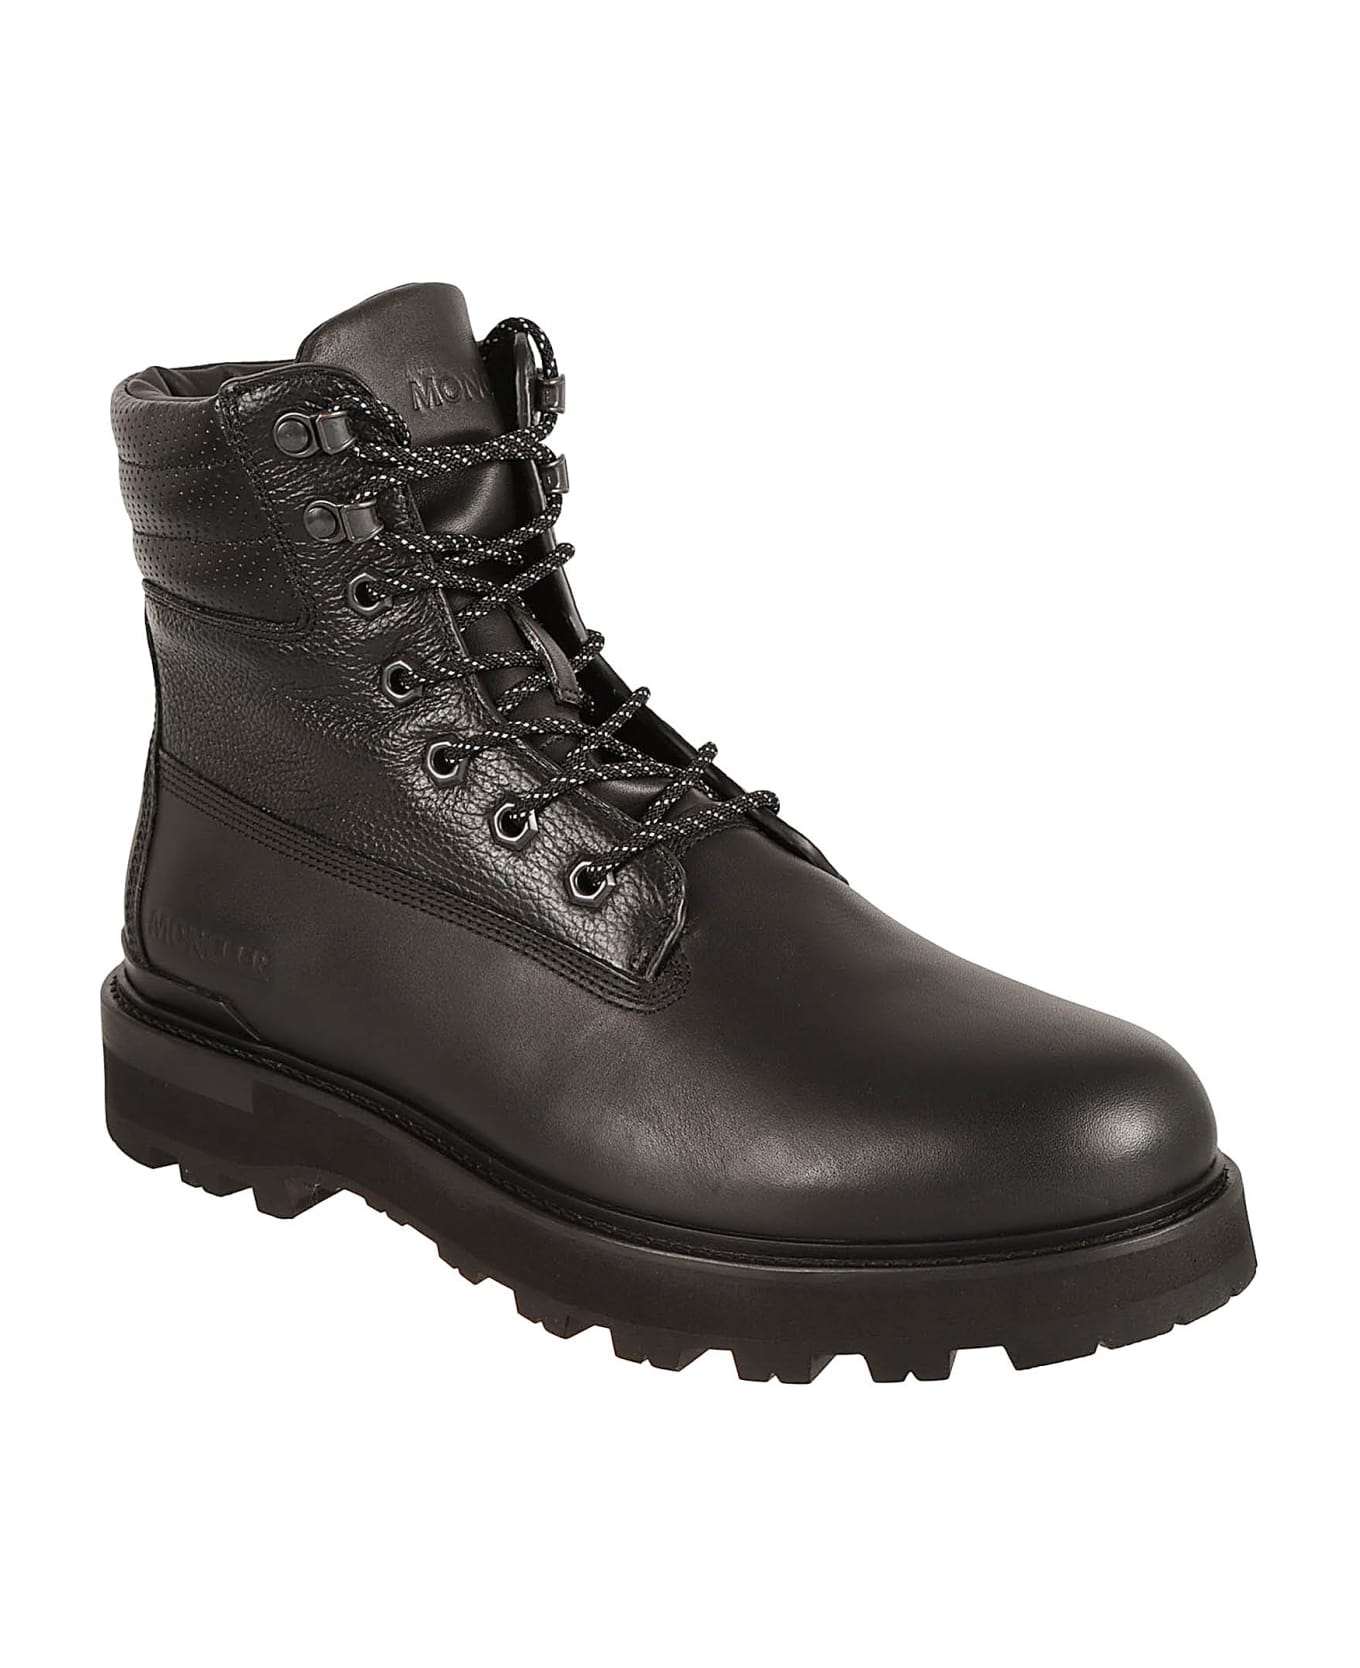 Moncler Peka Lace-up Boots - Black ブーツ